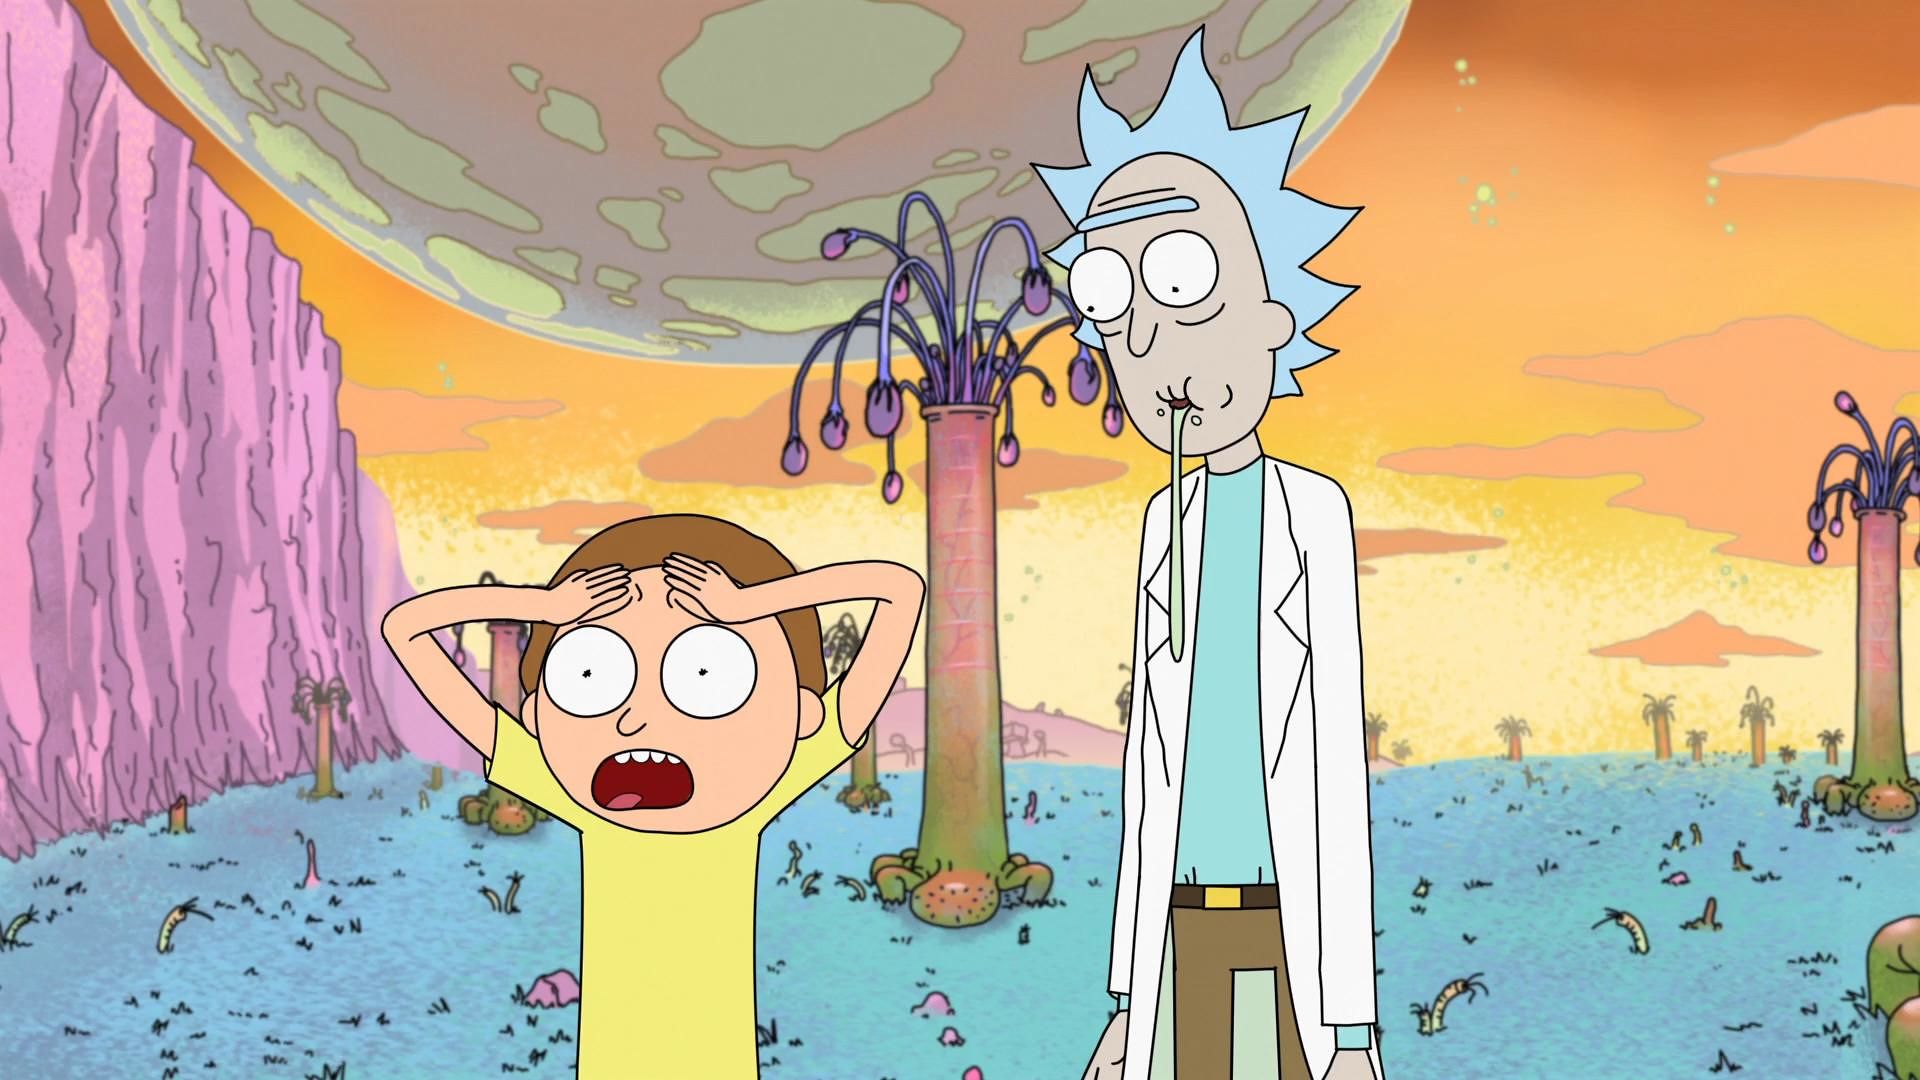 Rick and Morty Season 4 Episode 6 Delayed due to Covid-19